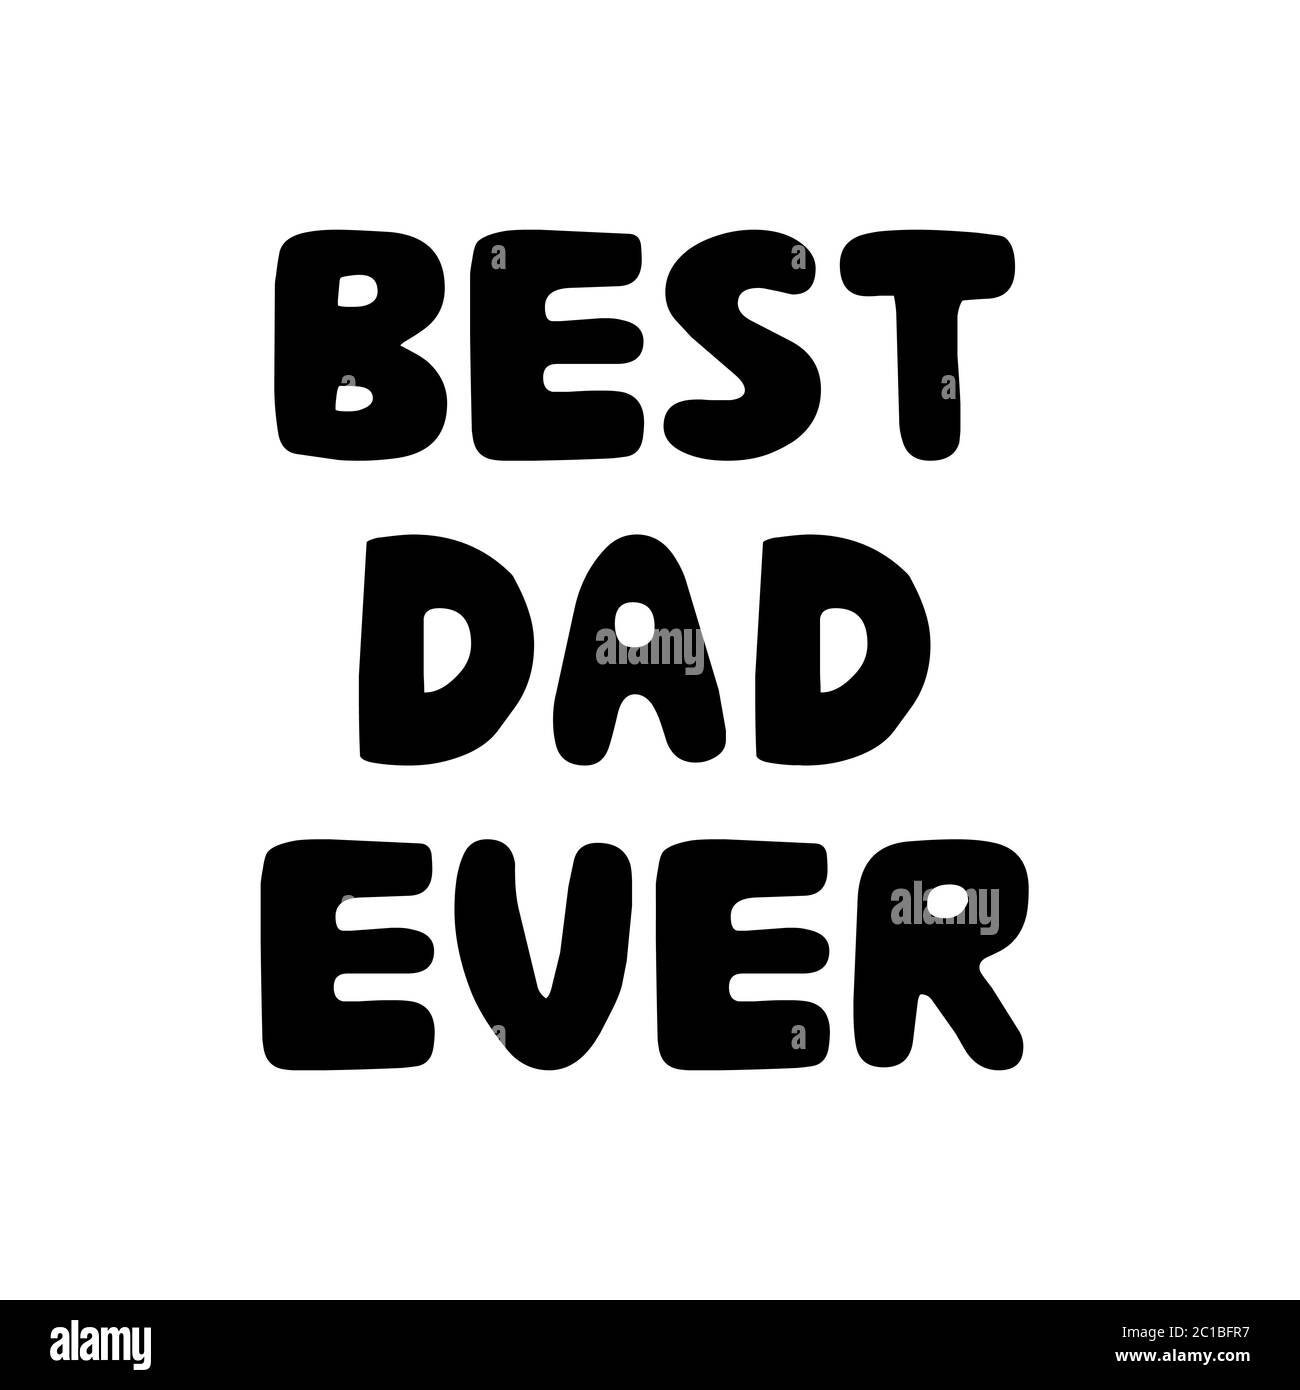 Best dad ever. Cute hand drawn bauble lettering. Isolated on white background. Vector stock illustration. Stock Vector